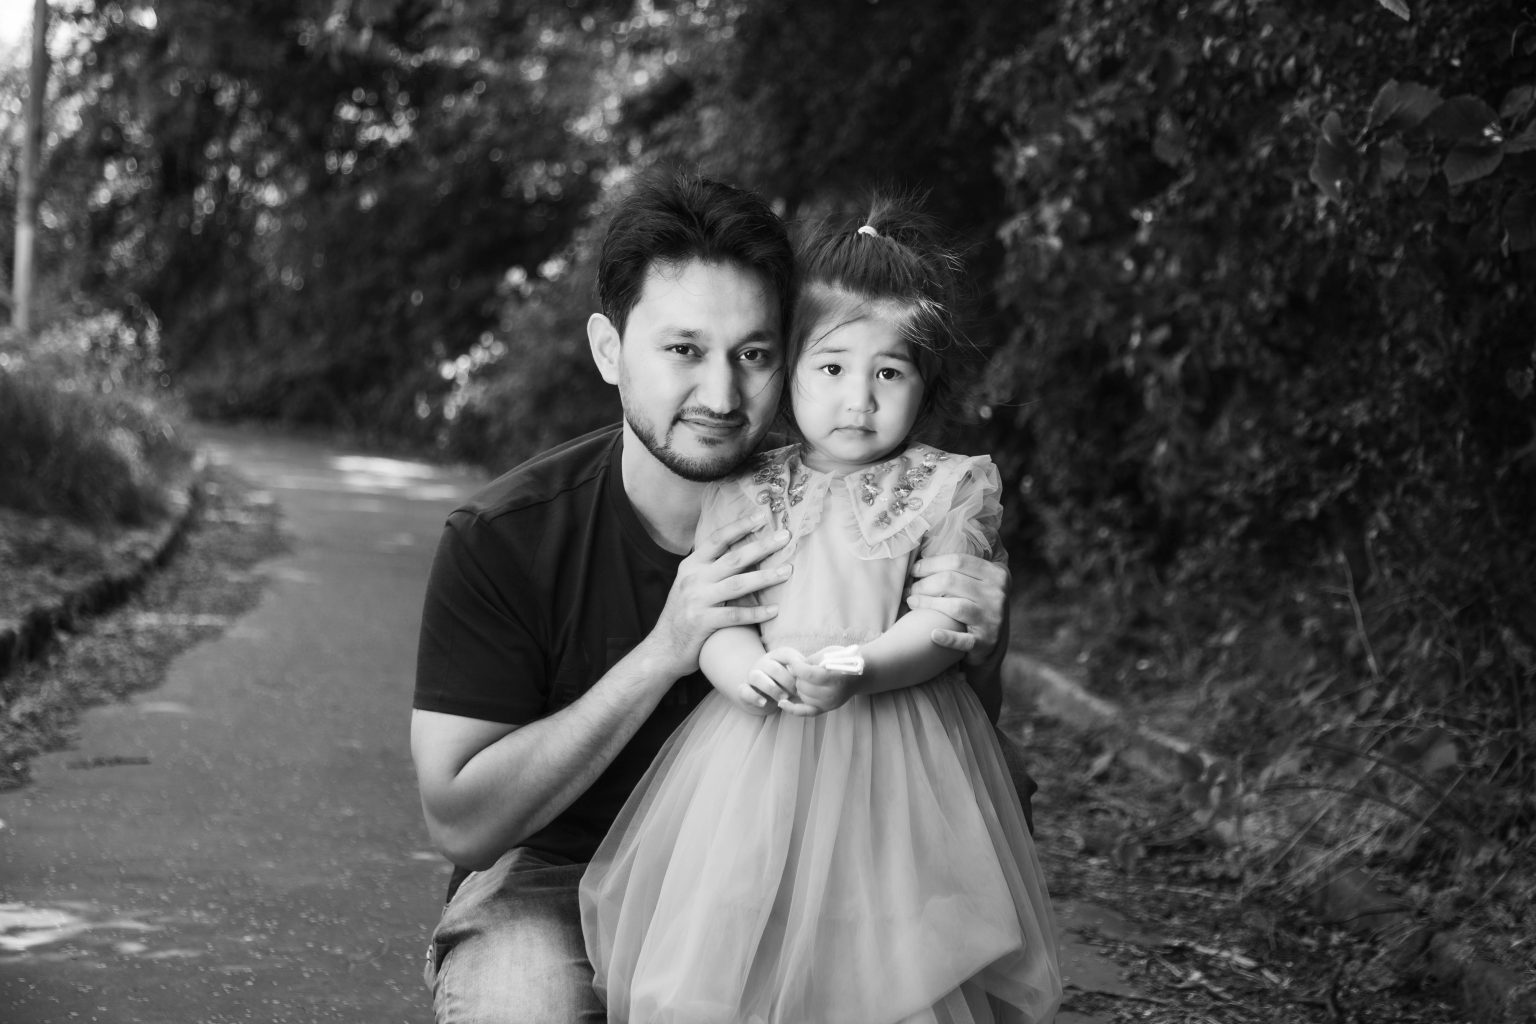 A man is crouched beside his young daughter on a narrow road. They are both smiling towards the camera. His daughter wears a tulle dress while he wears a t-shirt and jeans.